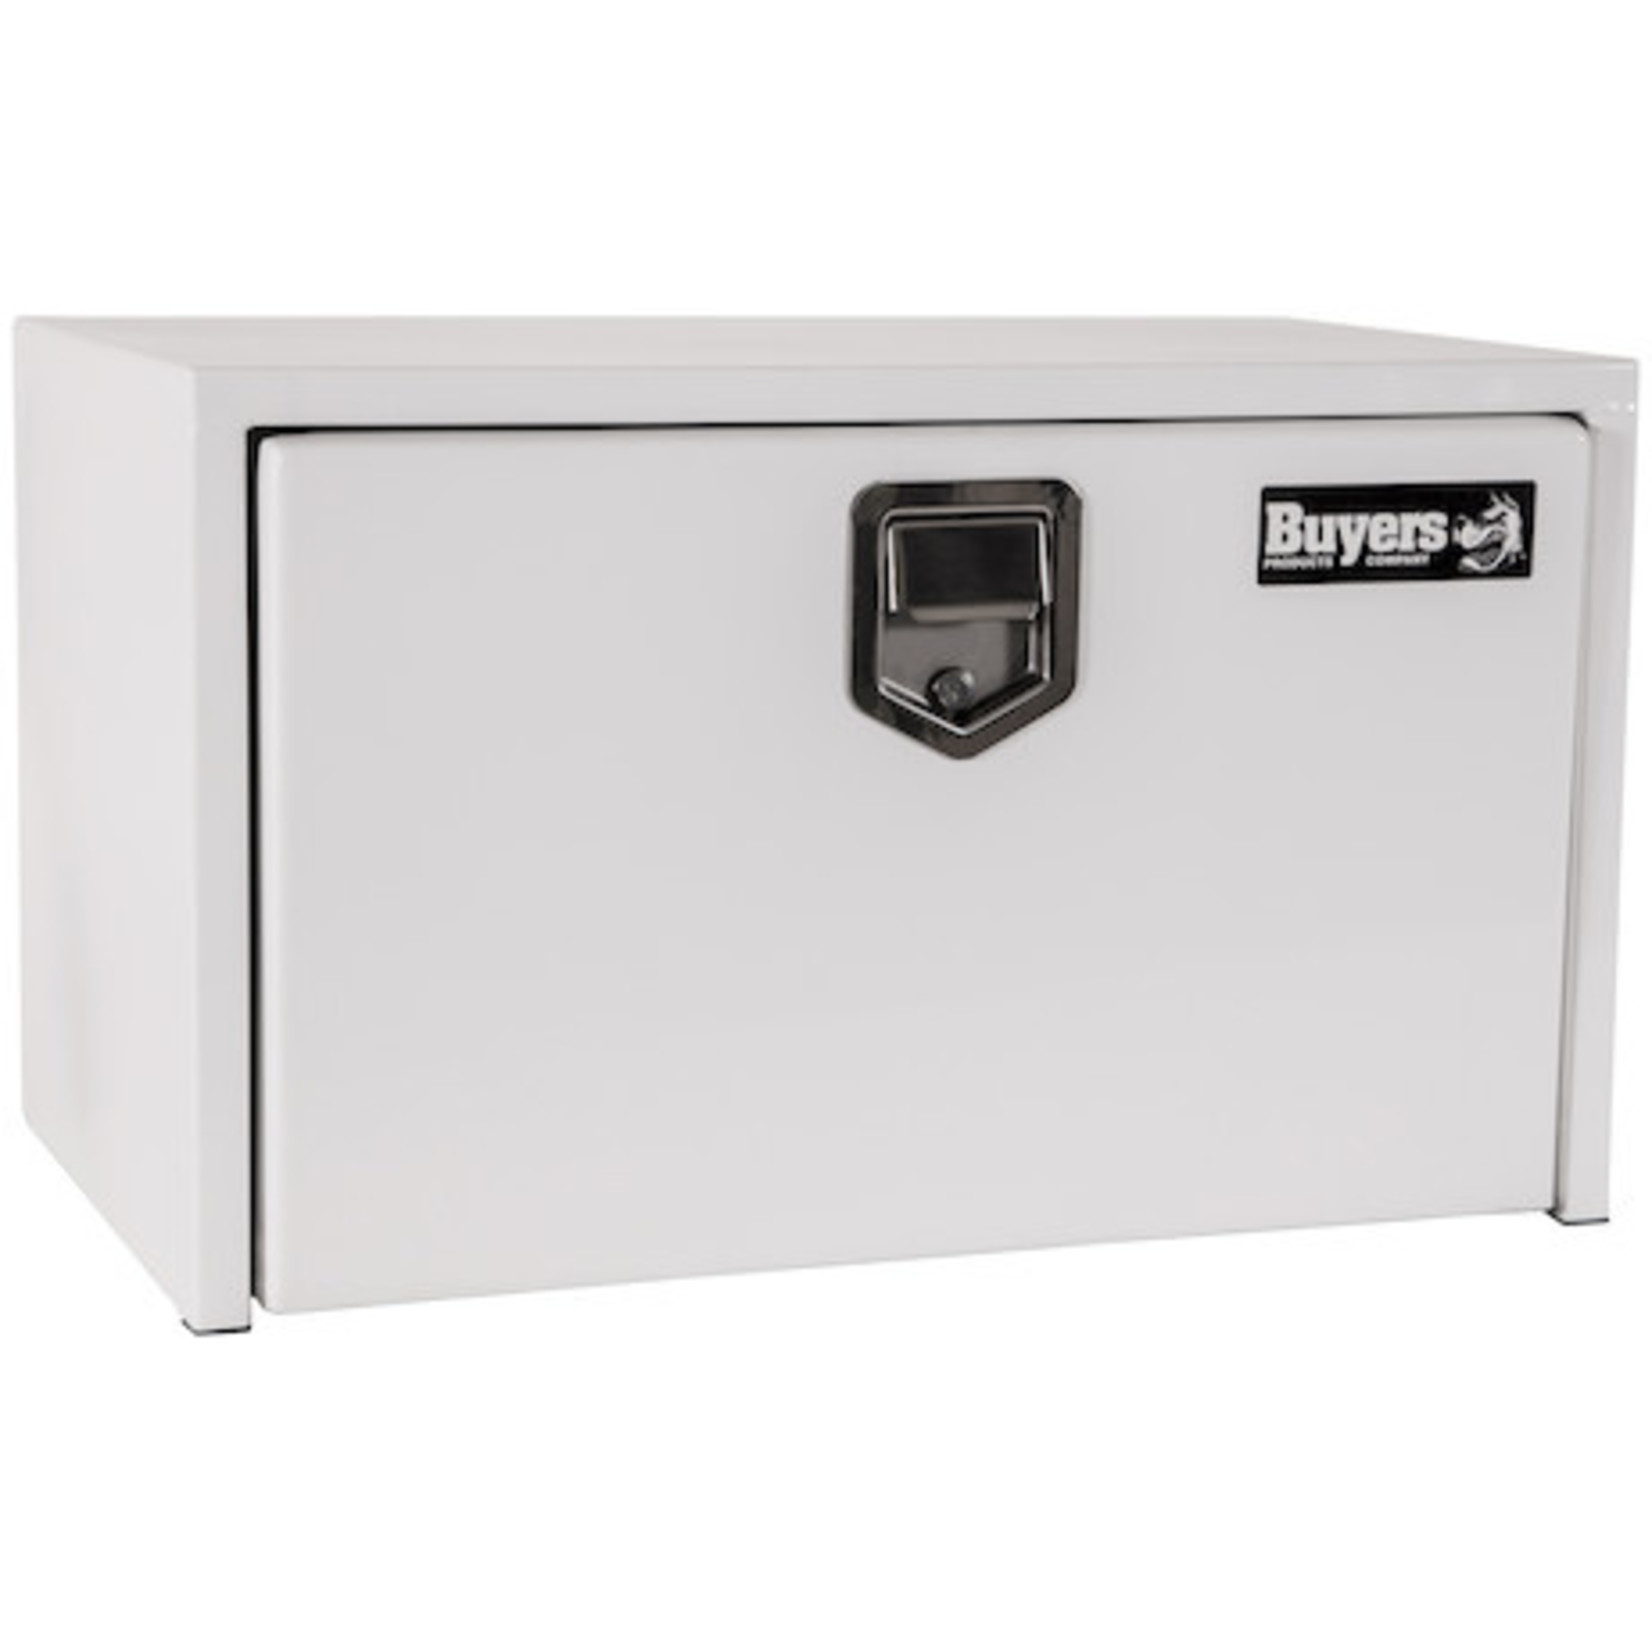 Buyers Products Company White Steel Underbody Truck Box with Paddle Latch Series